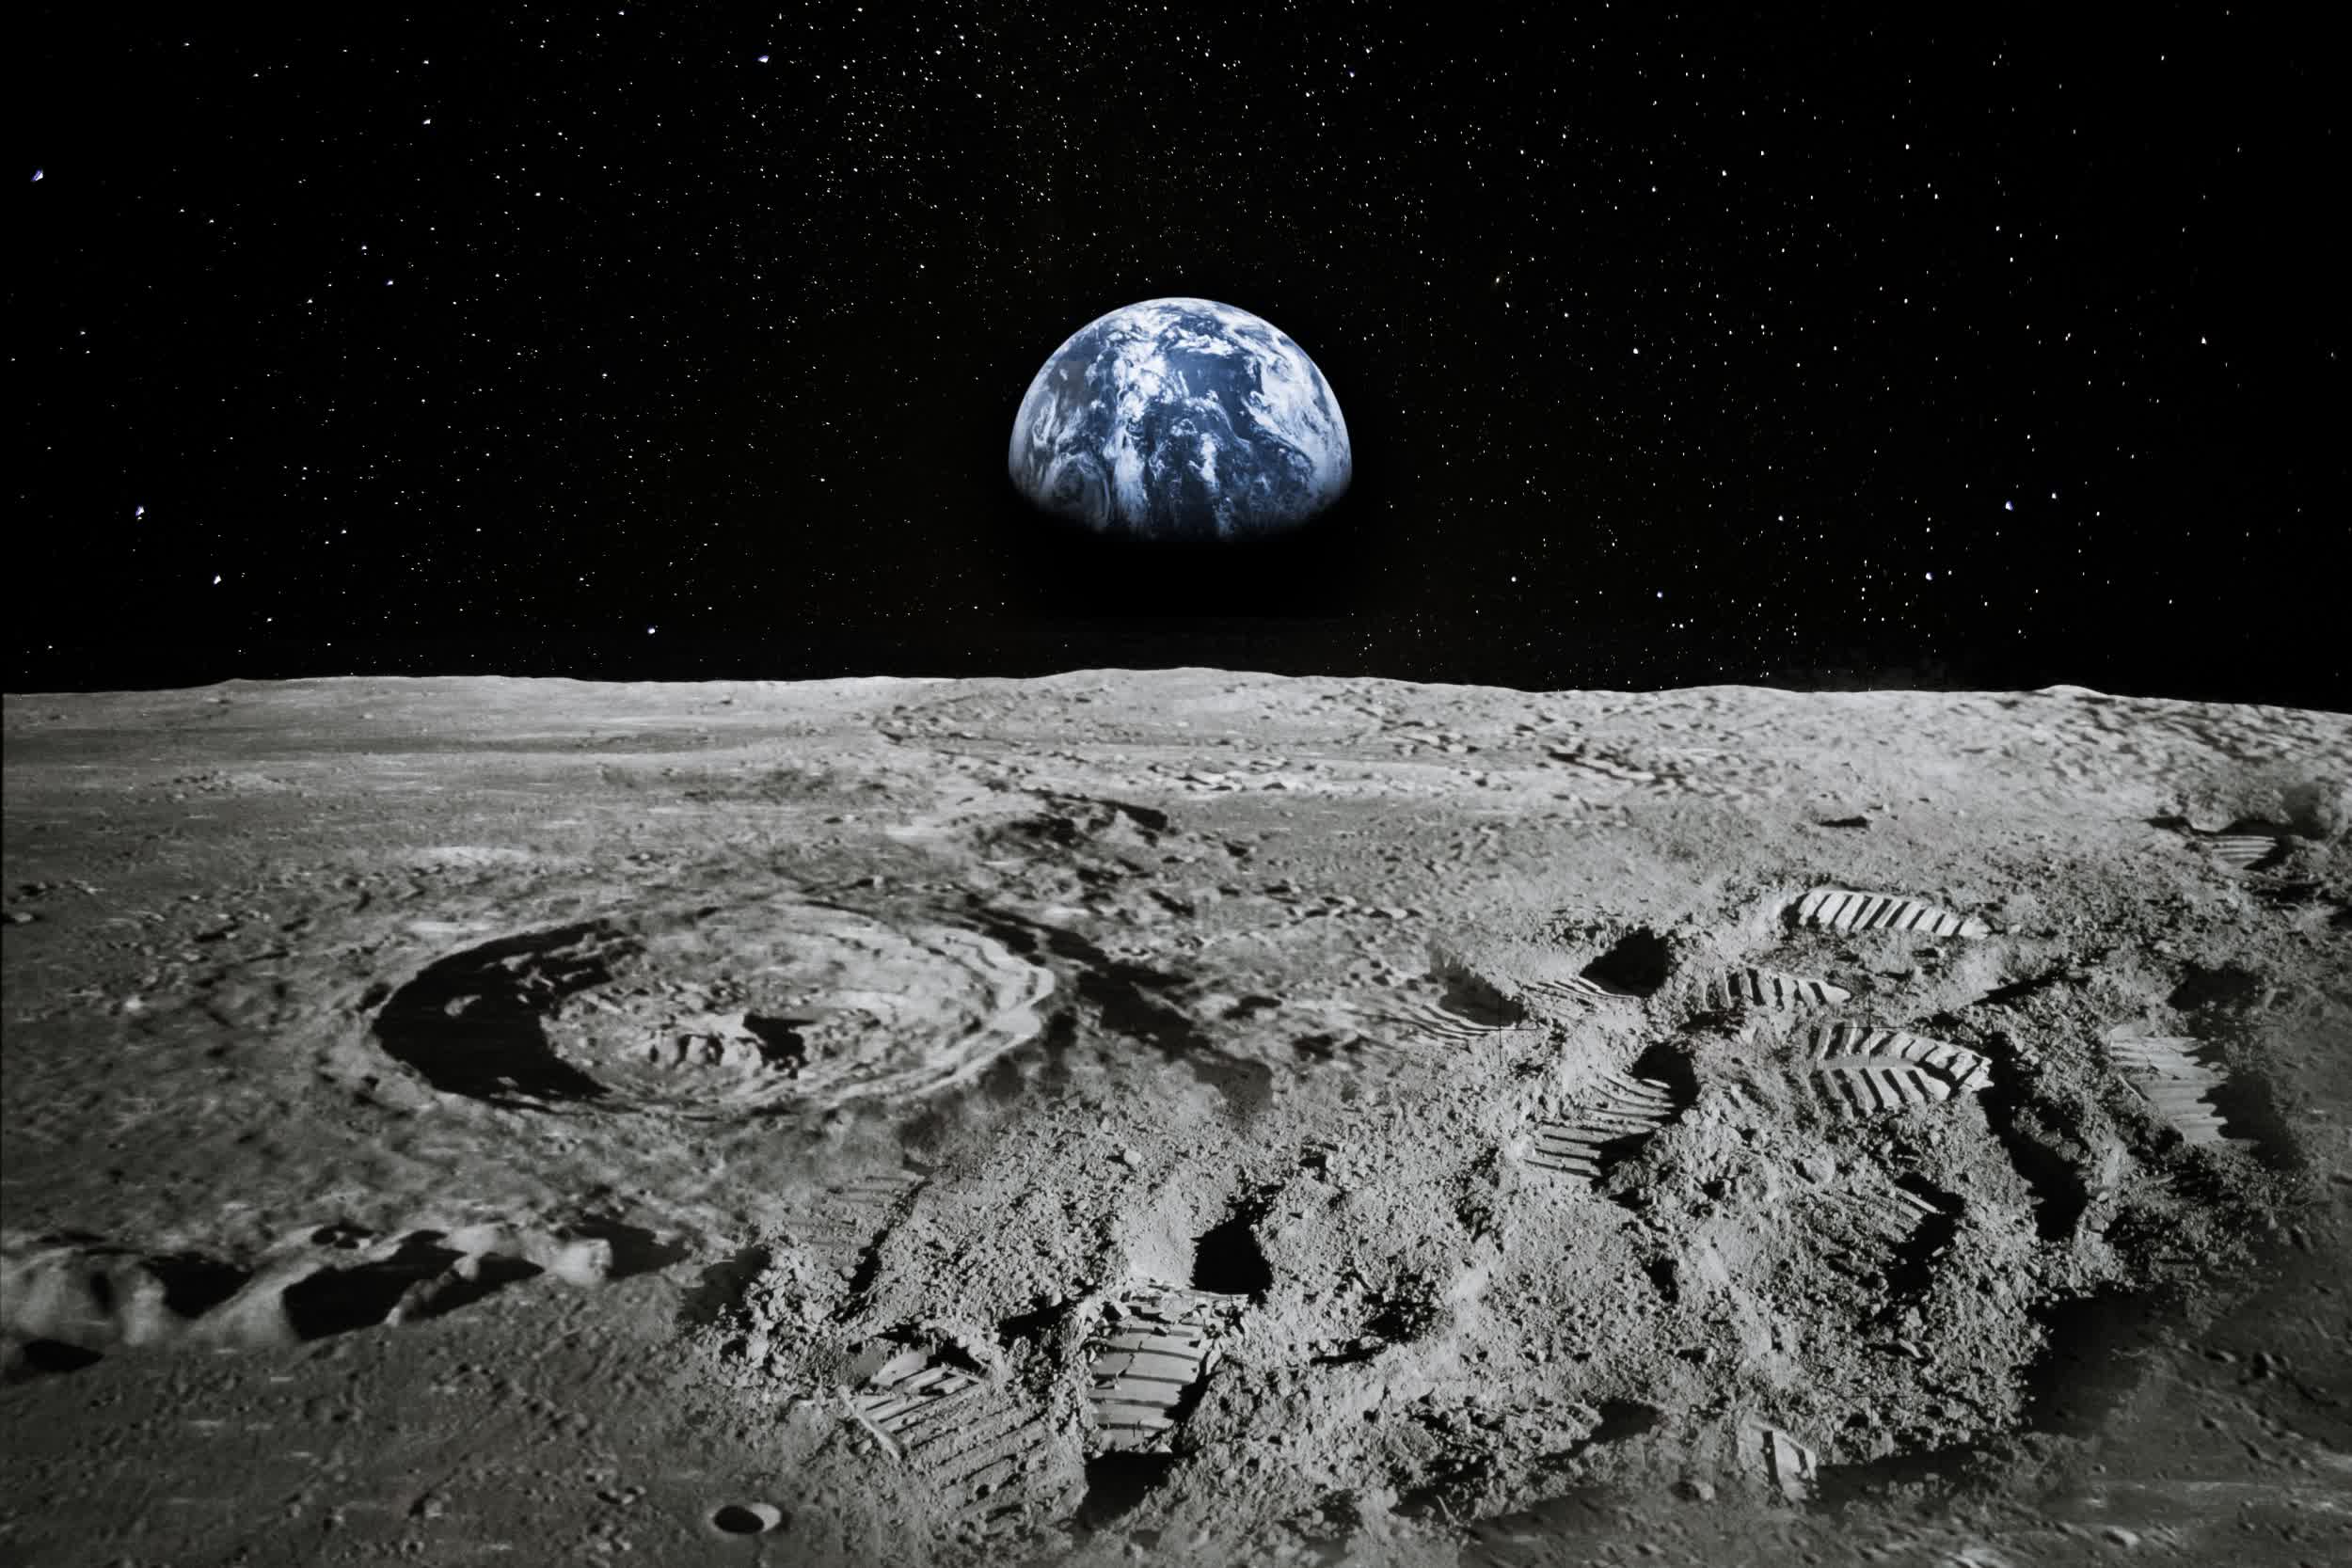 NASA has found water on a sunlit area of the Moon